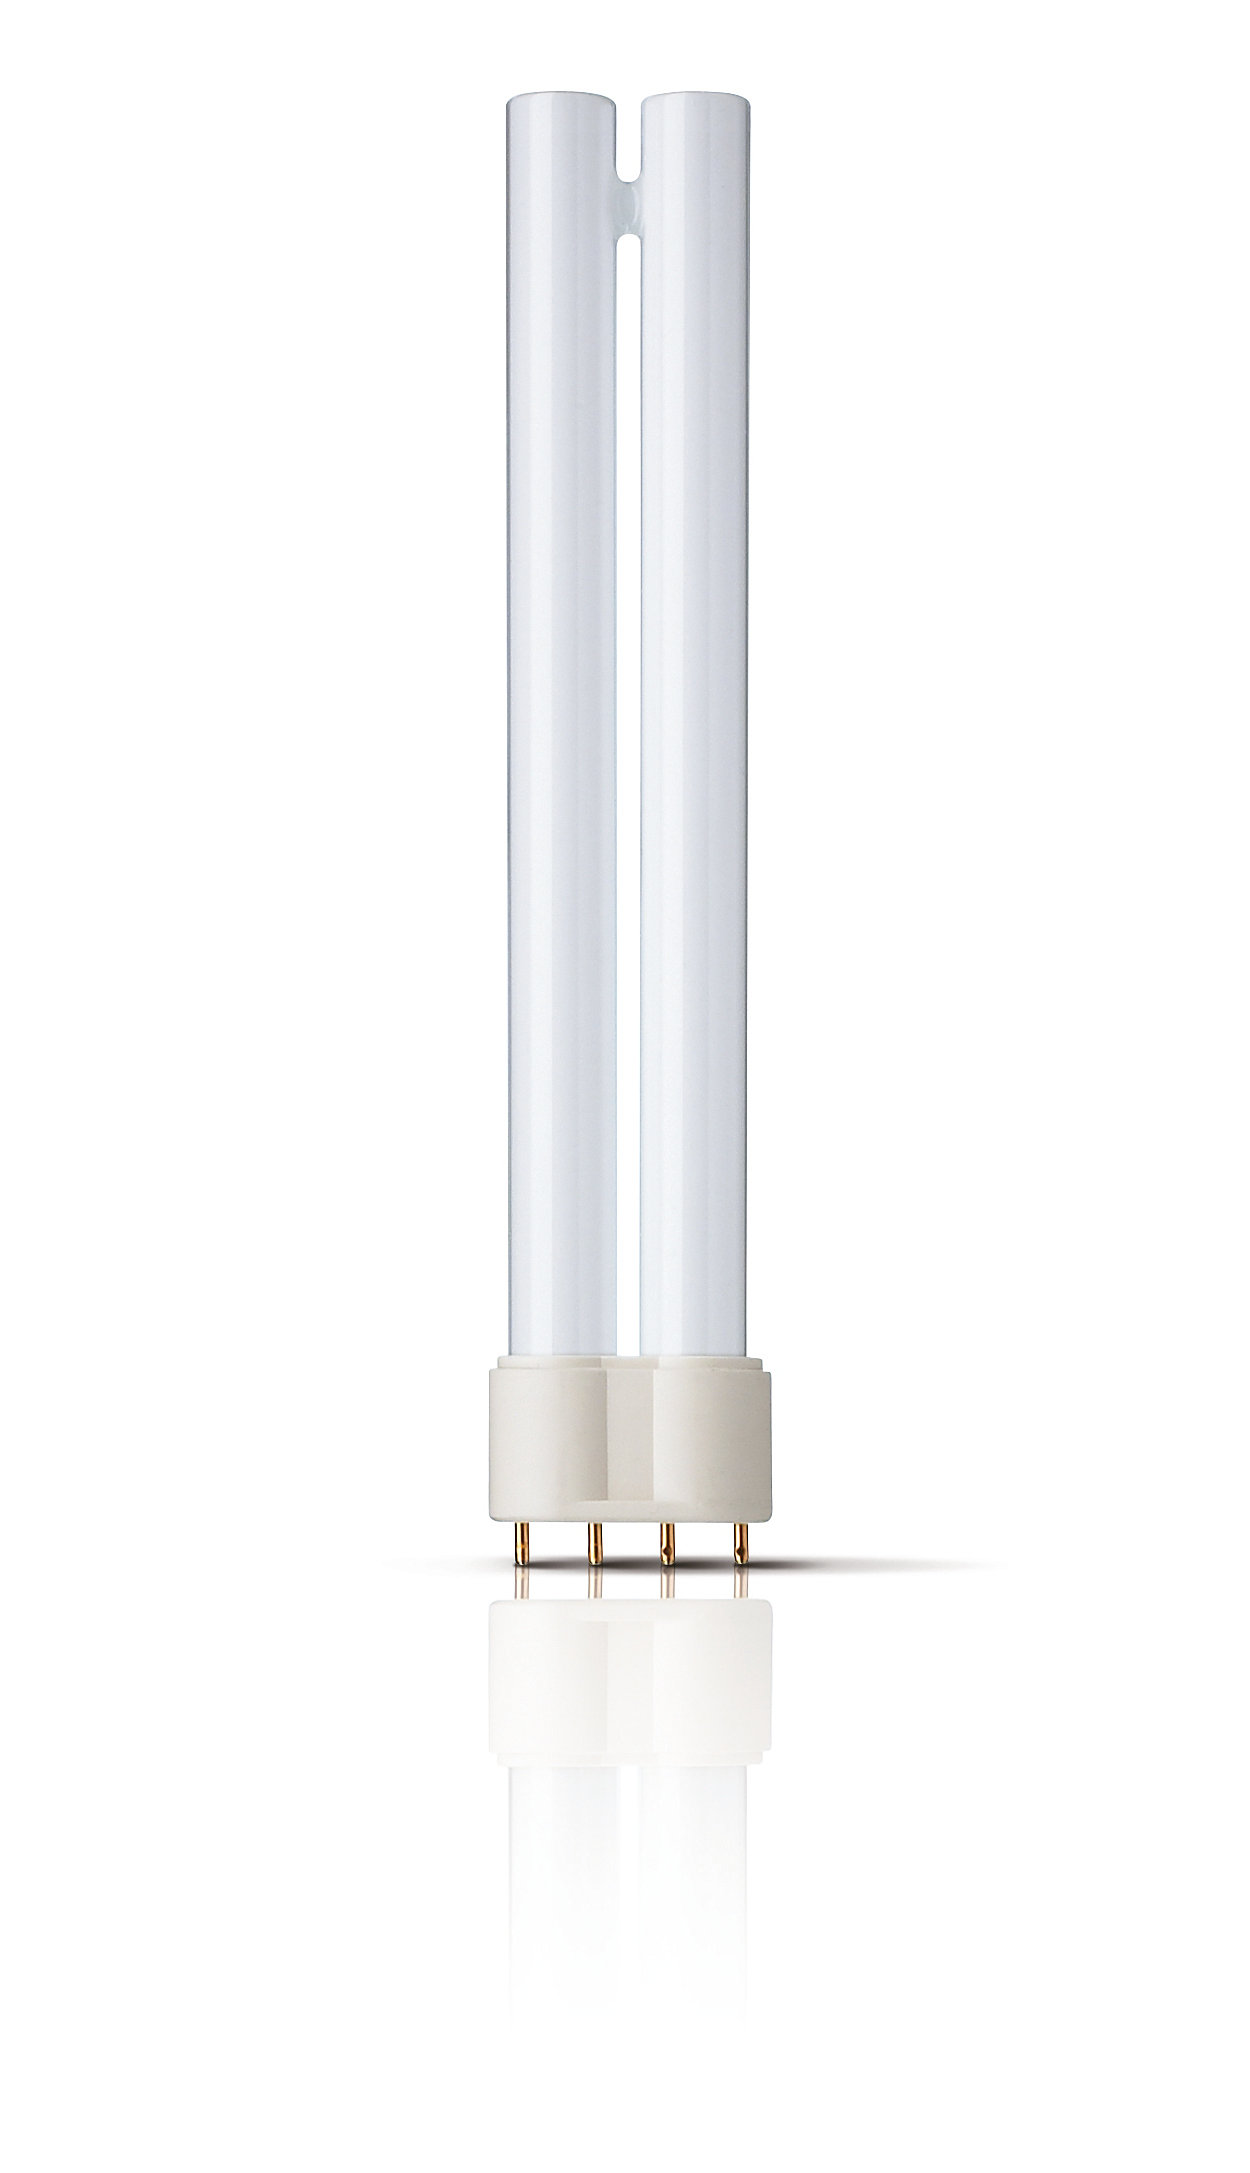 UVB Narrowband PL-L/PL-S – most effective phototherapy lamp plus design freedom